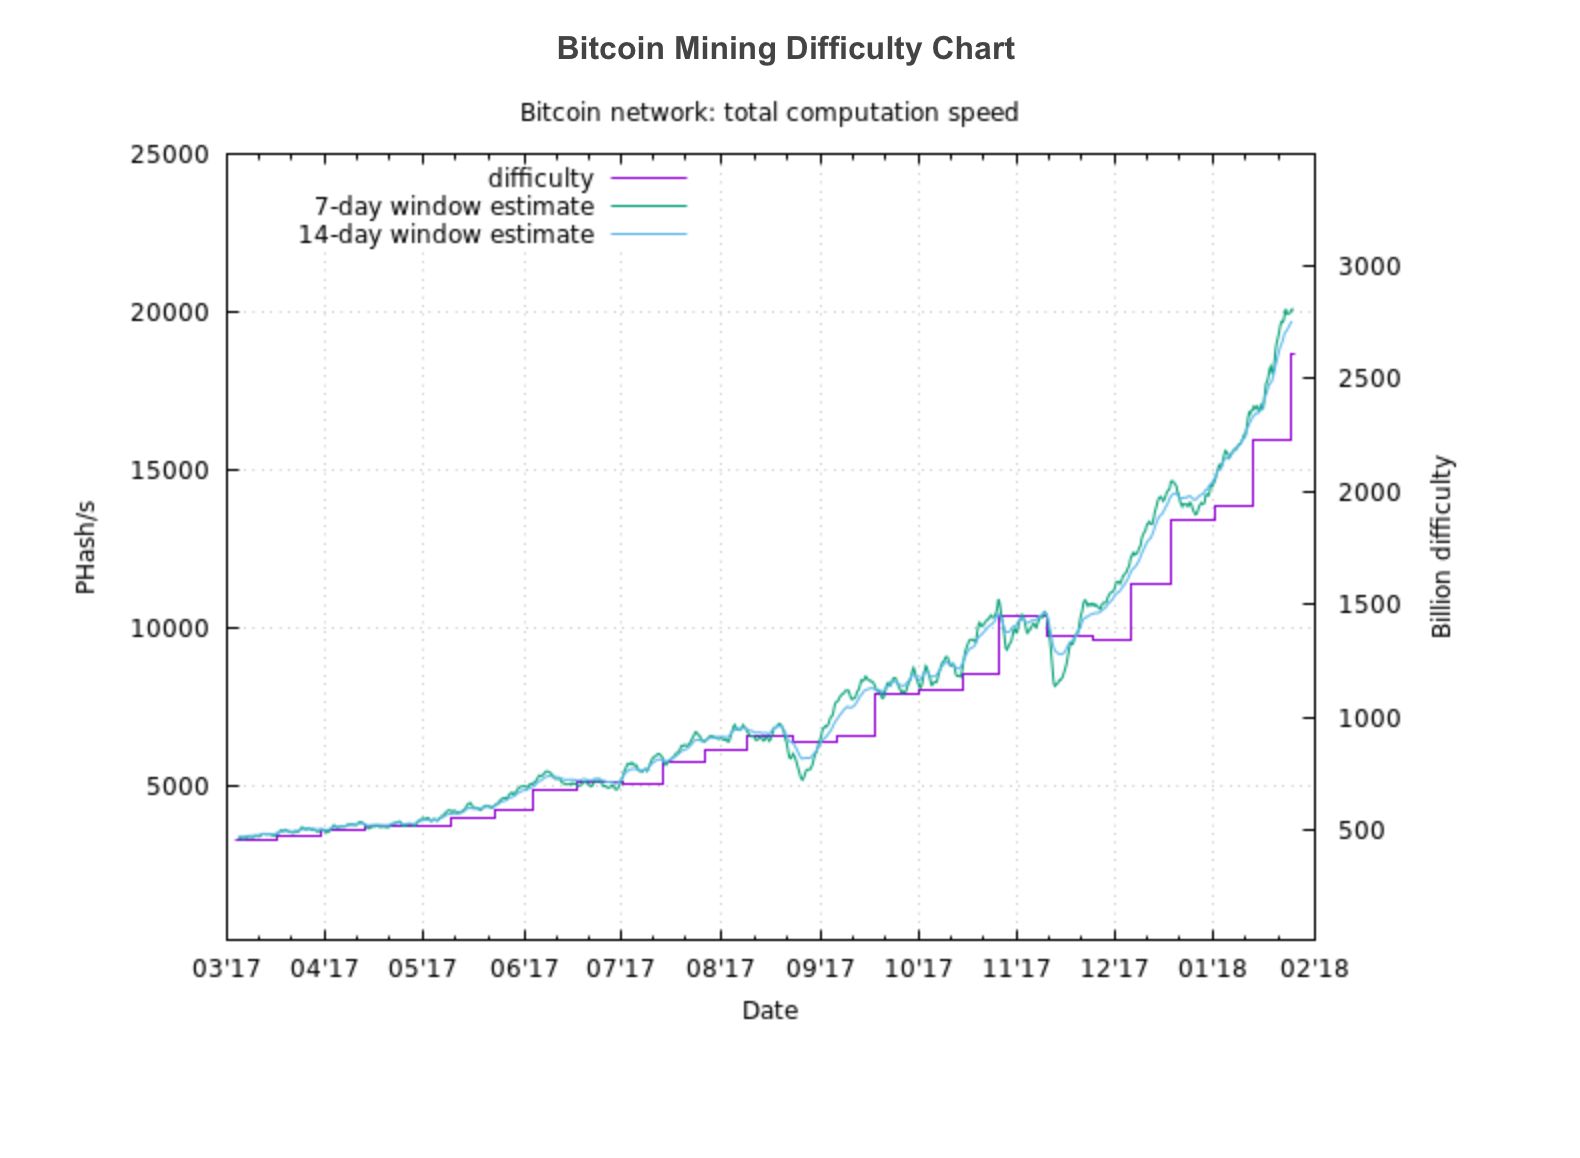 Mining Difficulty Chart